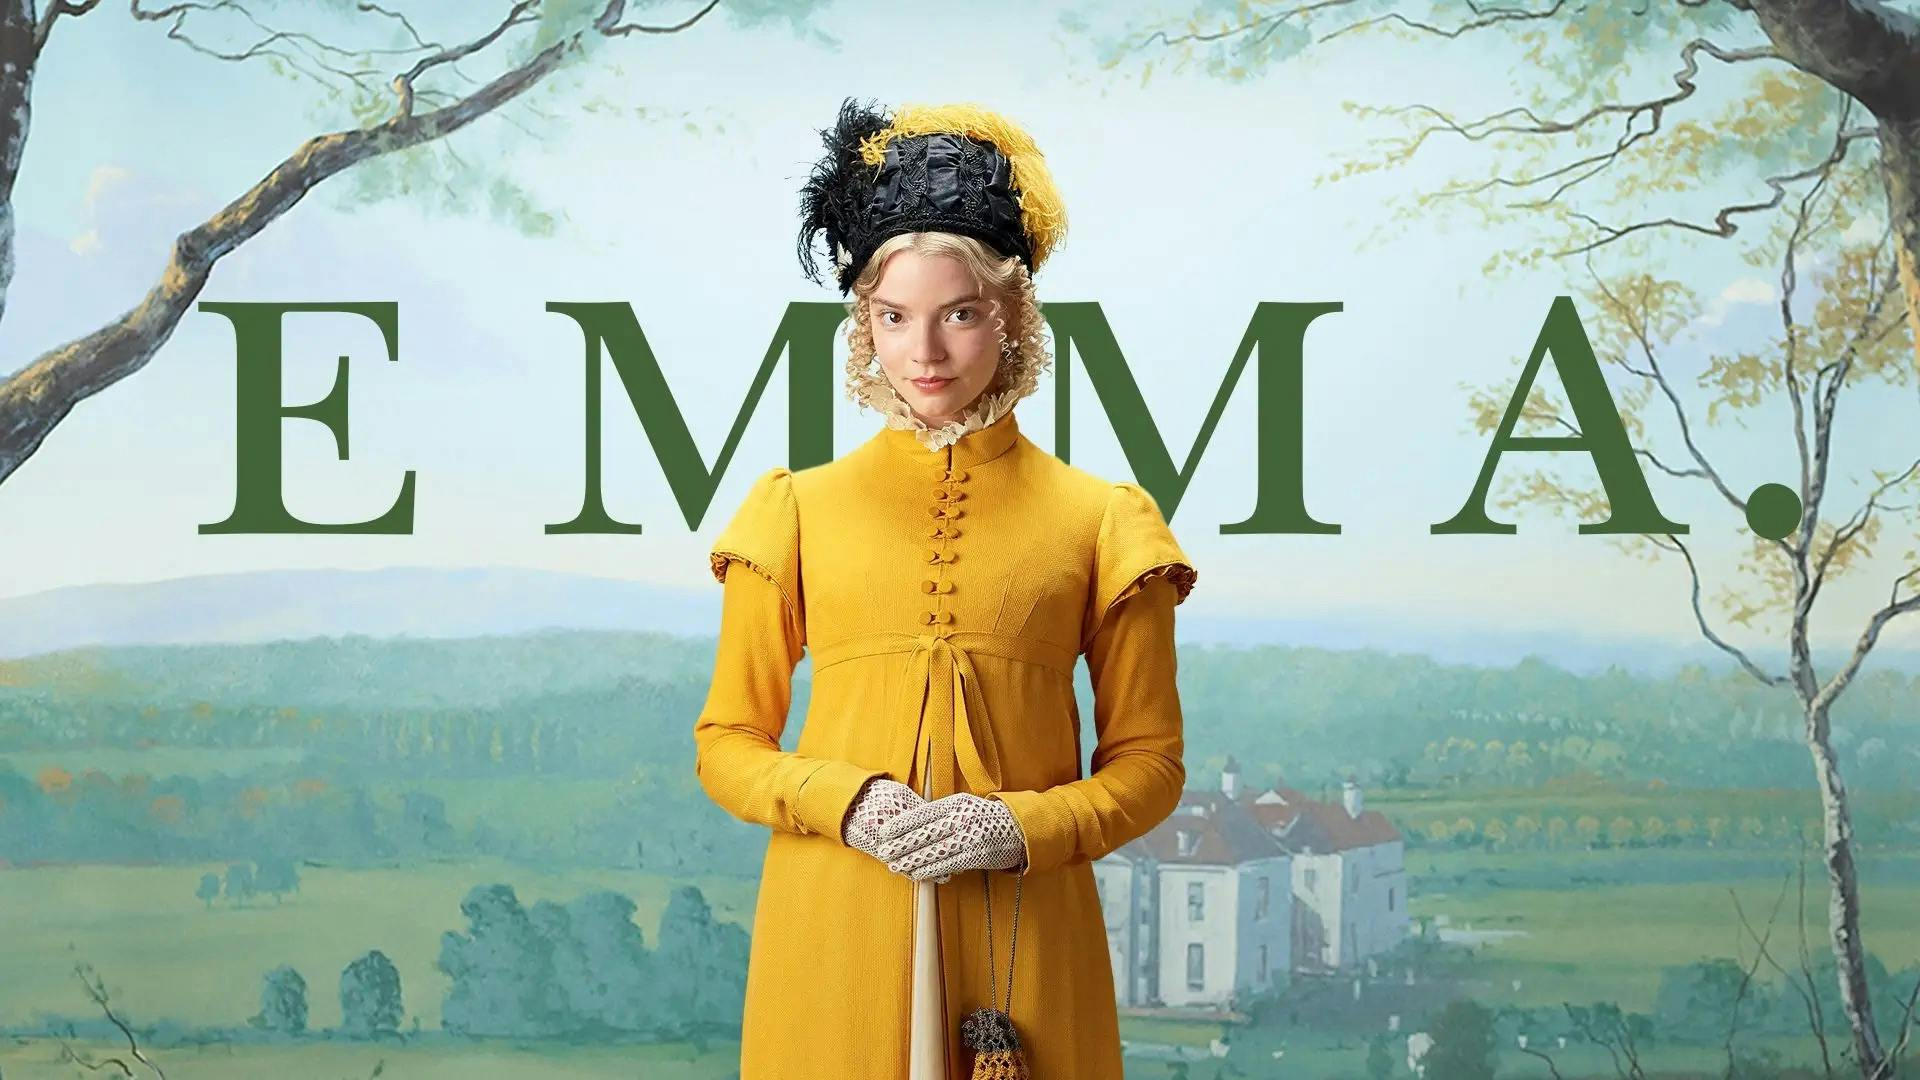 The thumbnail cover for the movie Emma